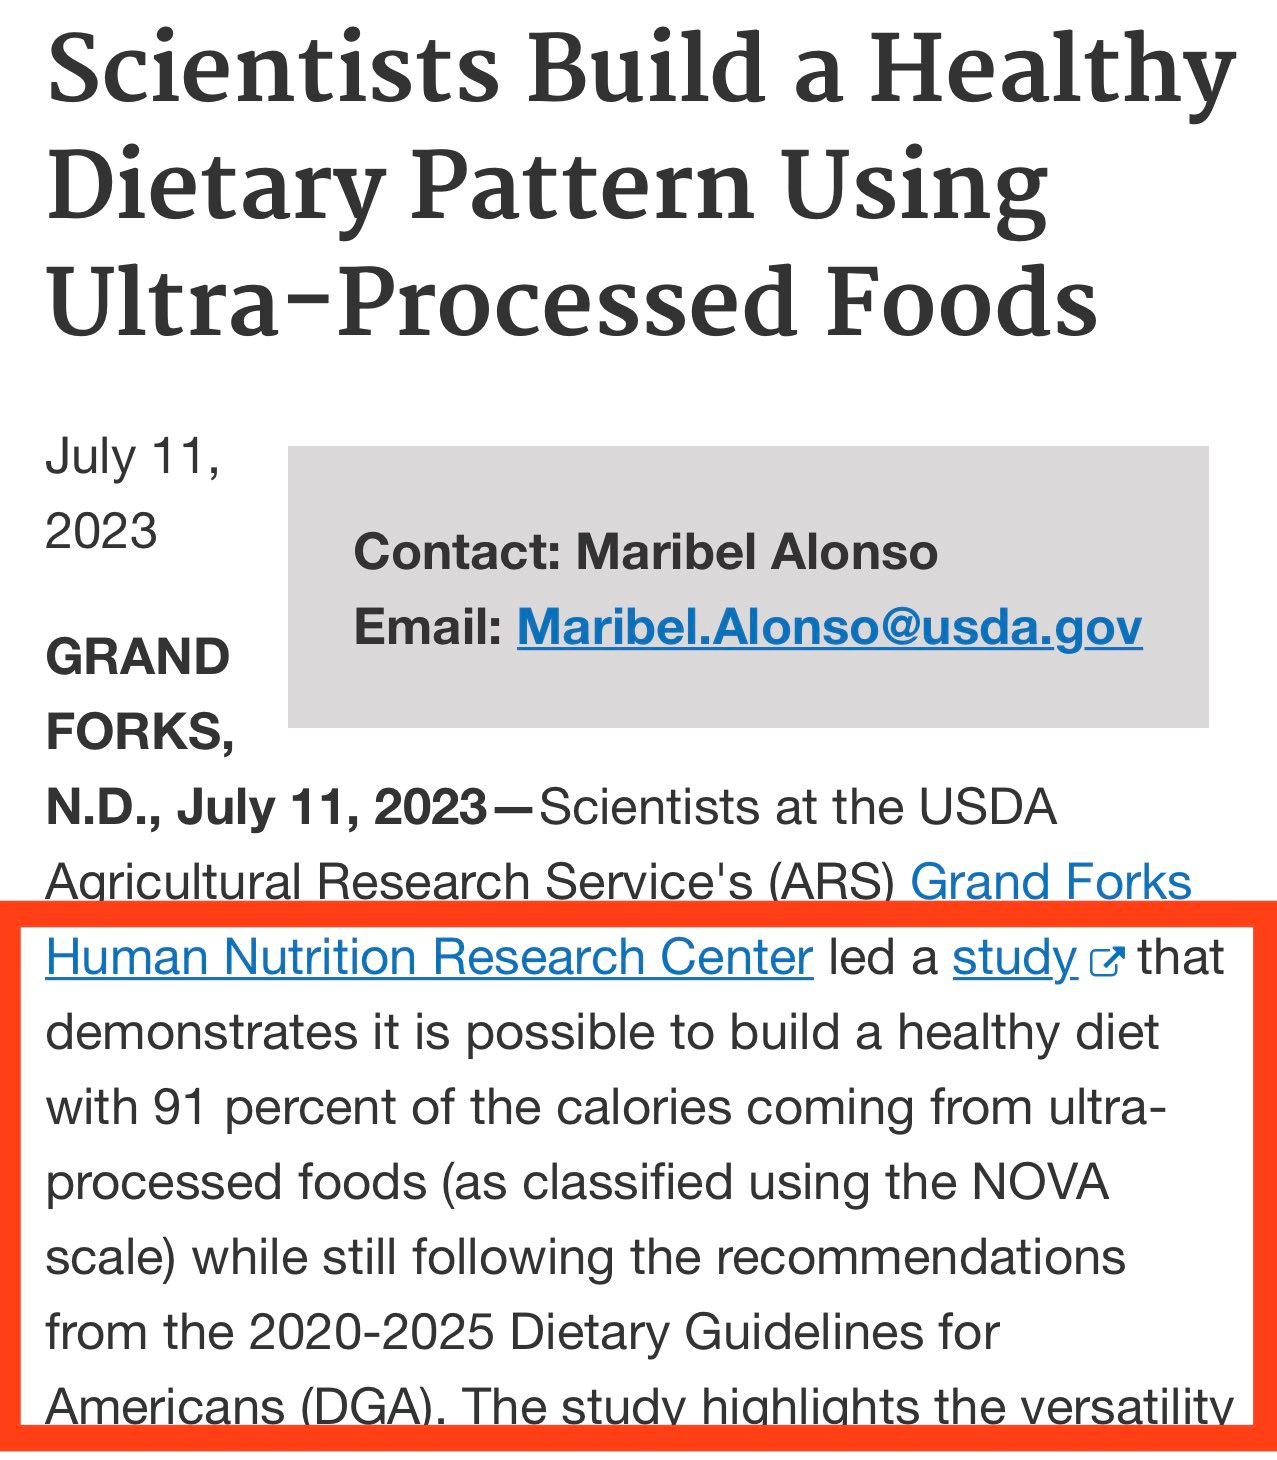 Dr. E on X: "Ultra-processed foods can be "healthy", says scientists funded  by the processed food industry. Citing what evidence? Well, as @KevinH_PhD  pointed out, apparently no human health data whatsoever, just